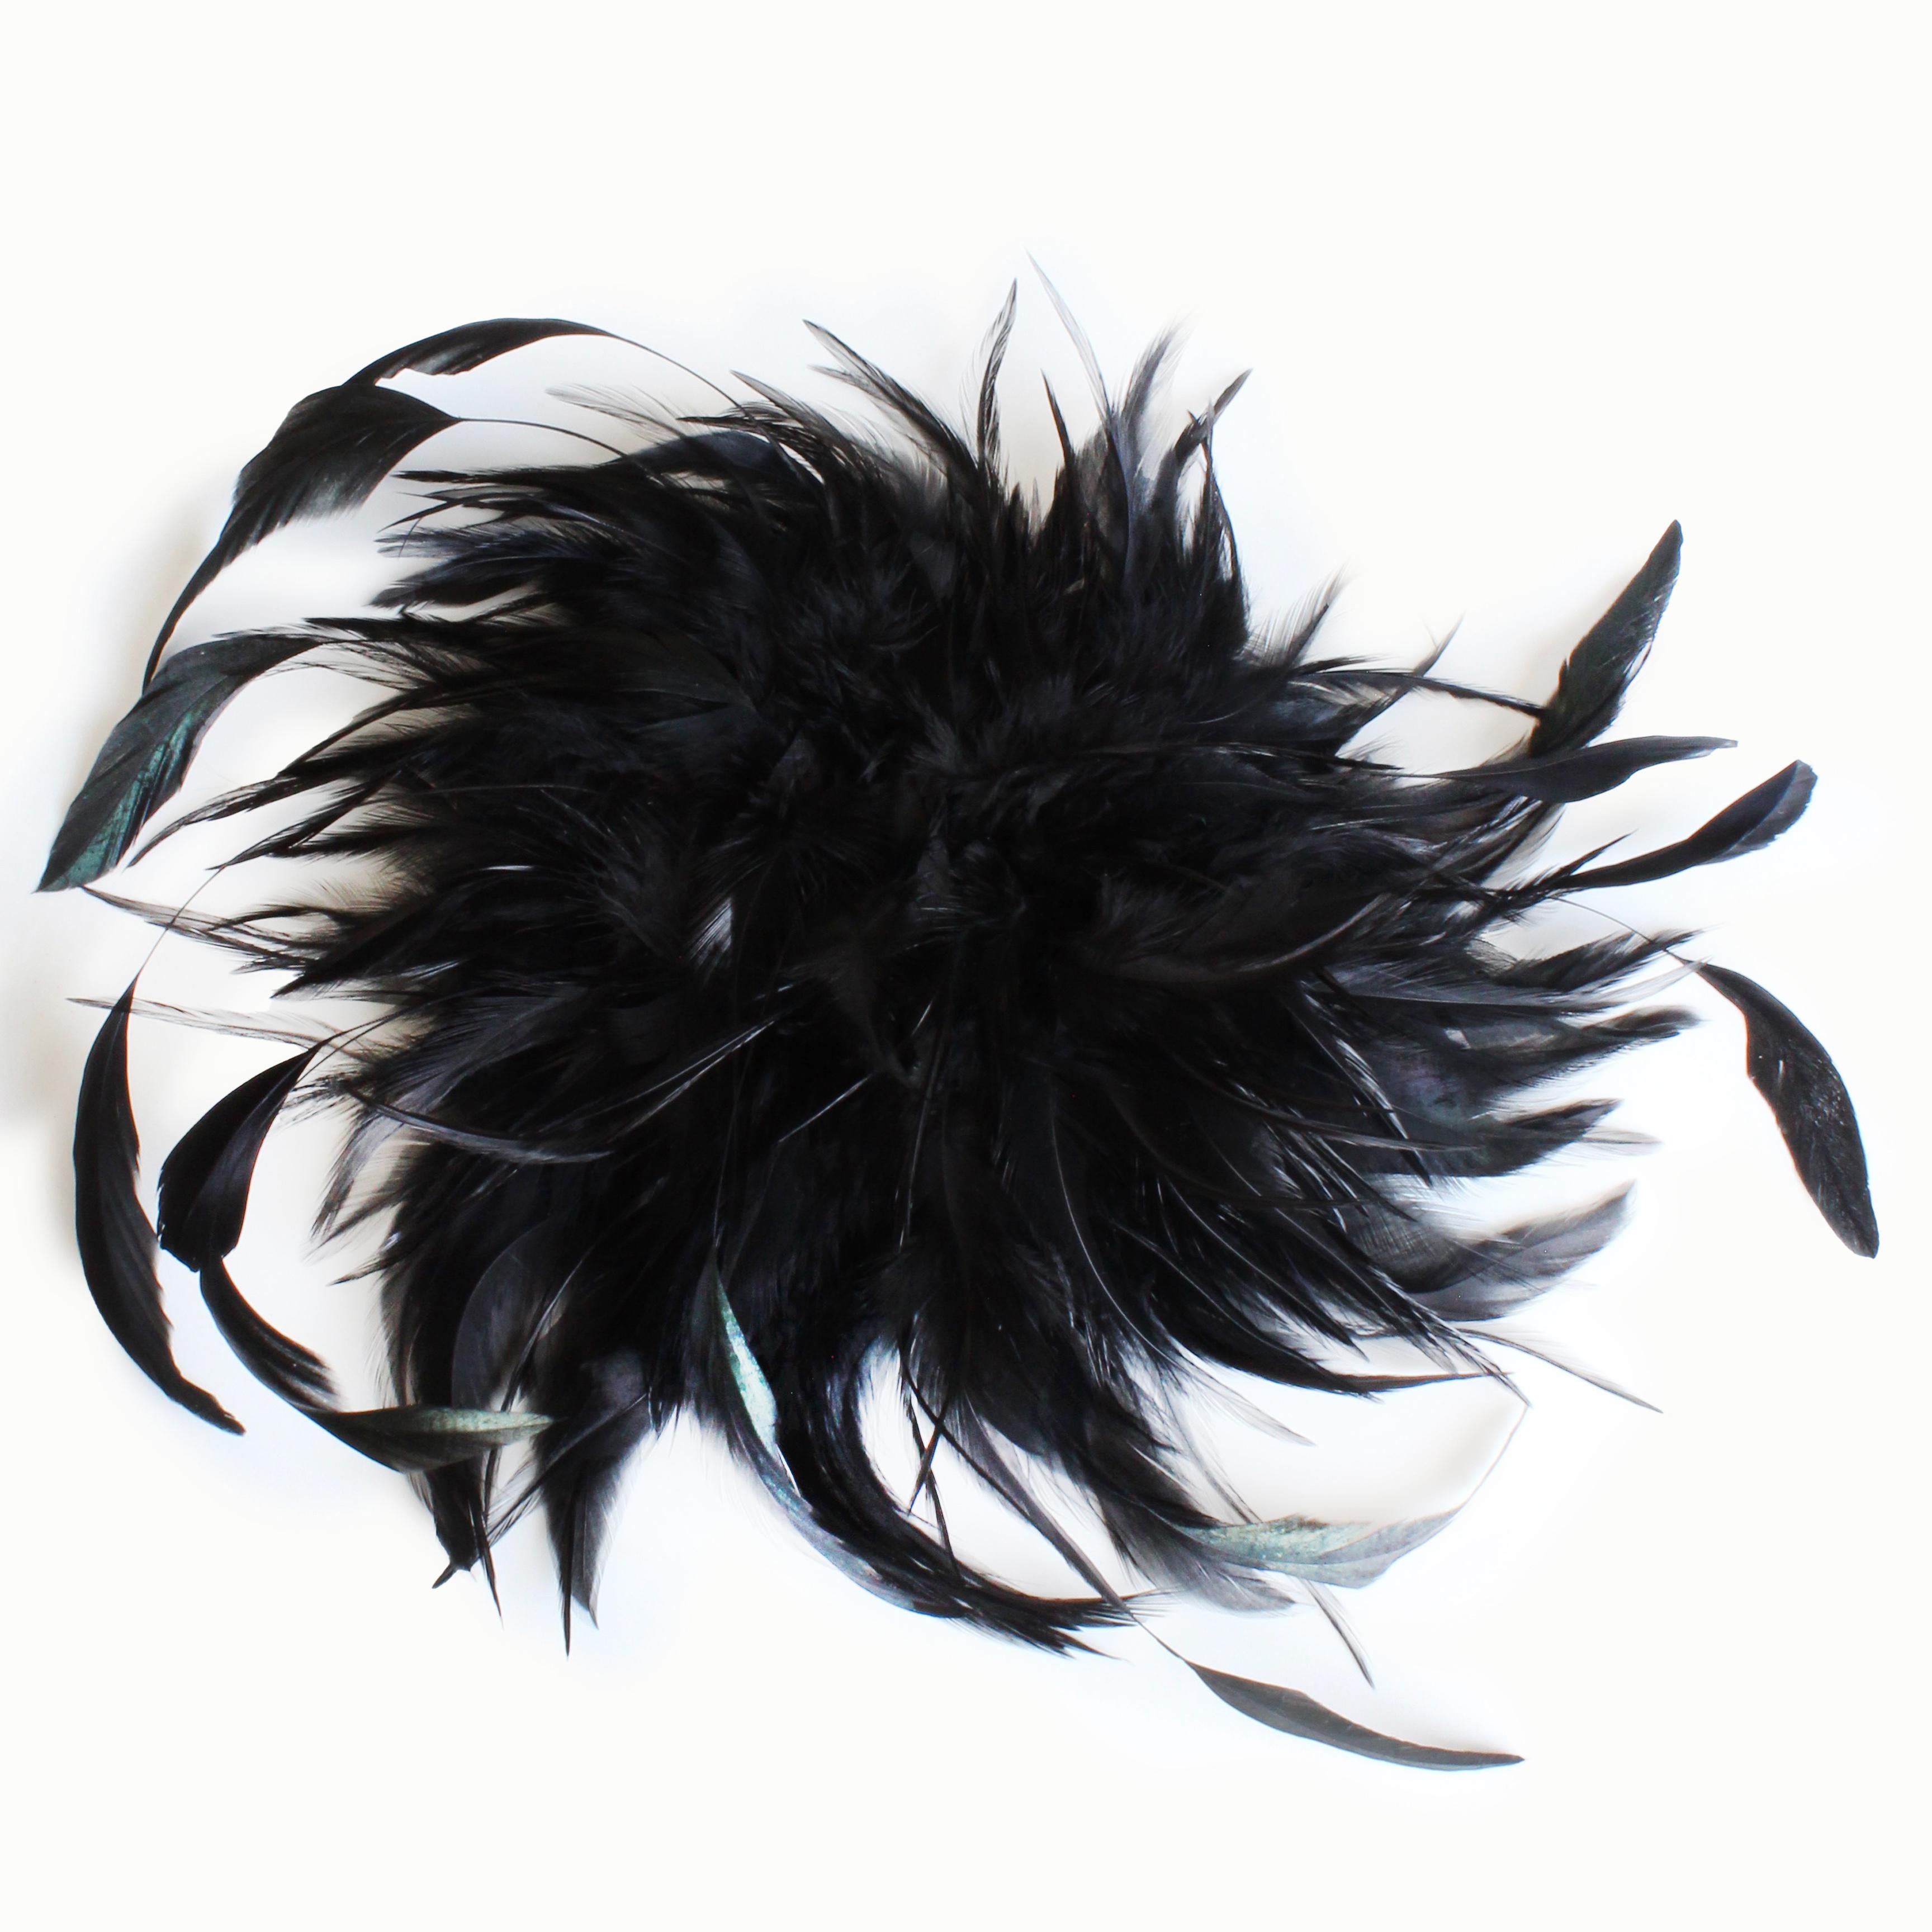 This rare feather cap was made by Yves Saint Laurent, most likely in the late 70s or early 80s. Made from a combination of black ostrich and longer plume feathers with black fabric layers in between, all of which are affixed to a netted fabric base